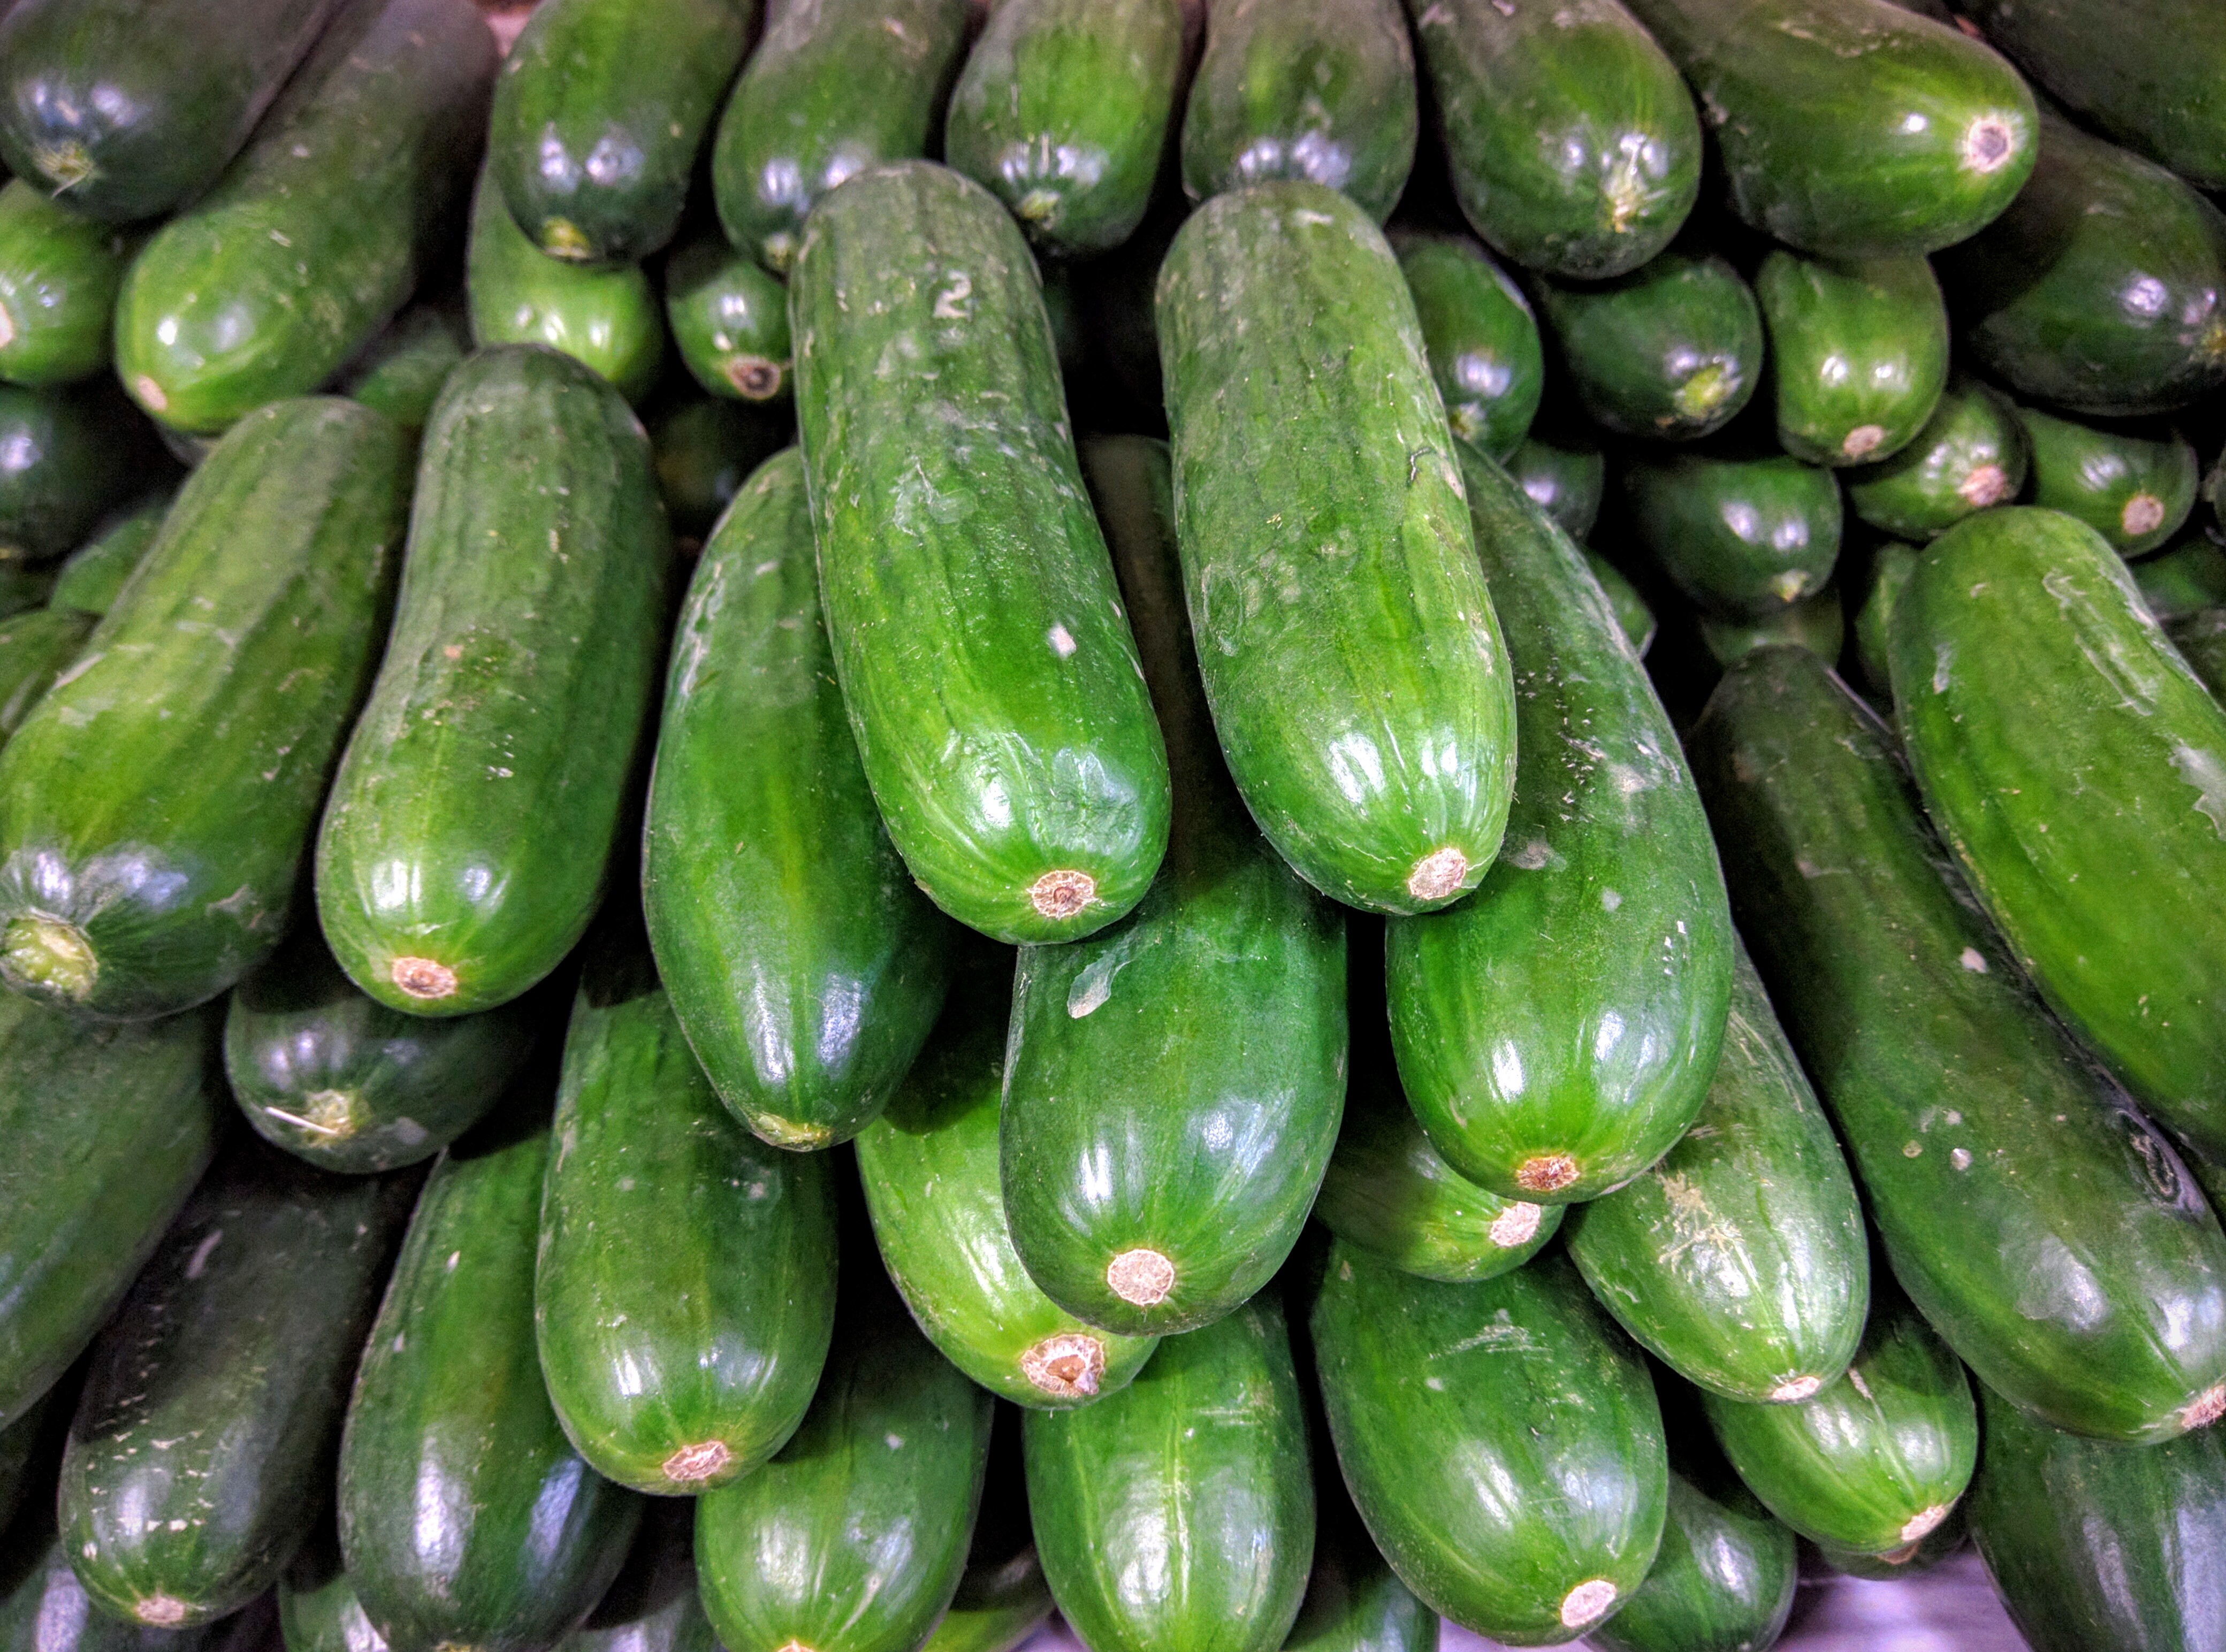 Australia Cucumbers for sale at store